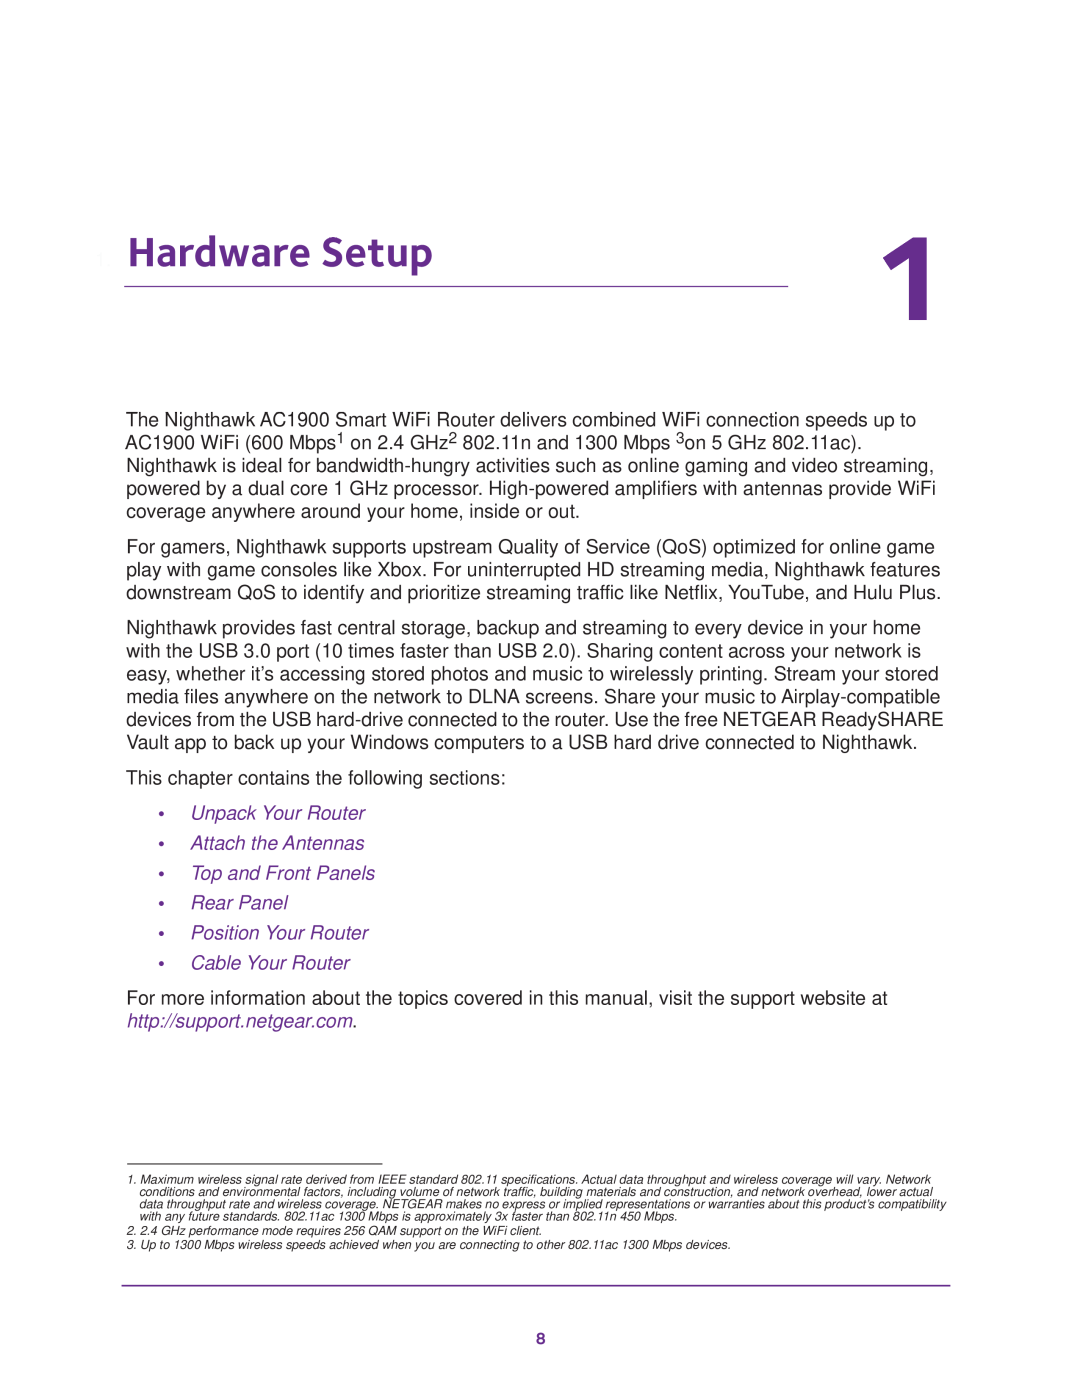 NETGEAR Model R7000 user manual Hardware Setup, Unpack Your Router Attach the Antennas Top and Front Panels 